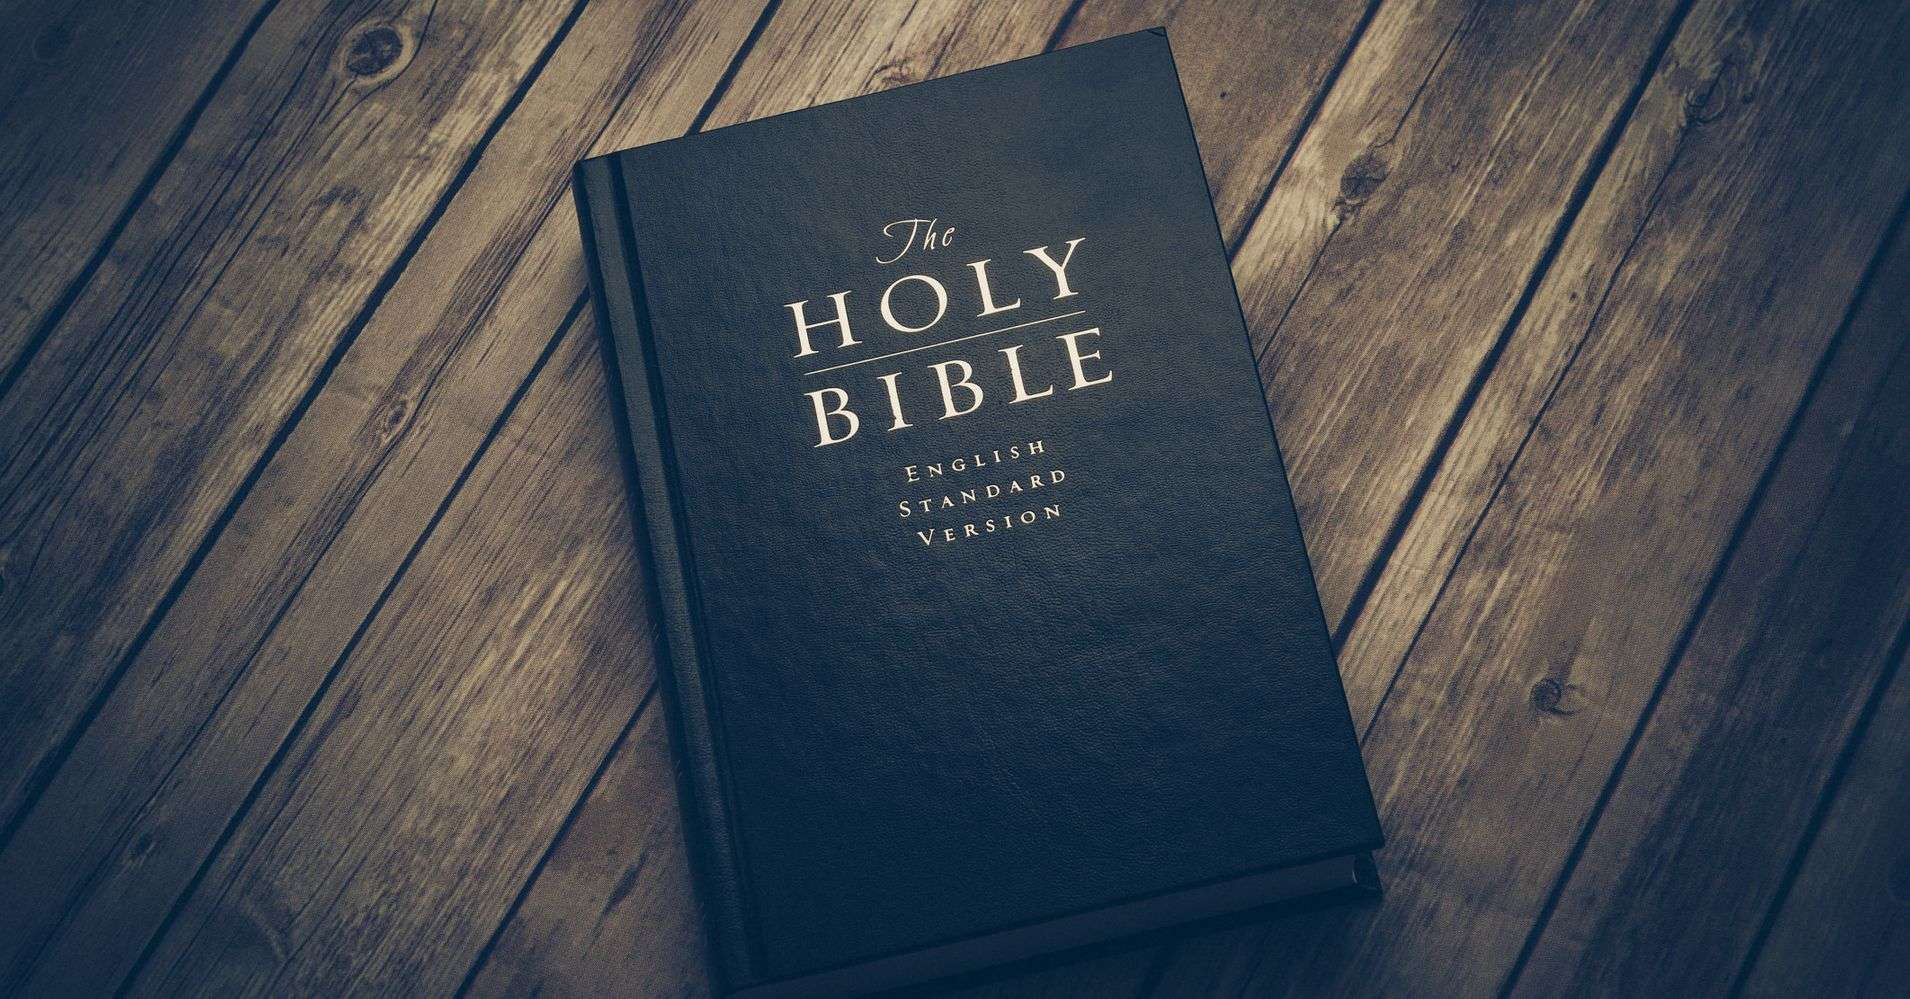 The Holy Bible Is Now One Of The Most Challenged Books In ...